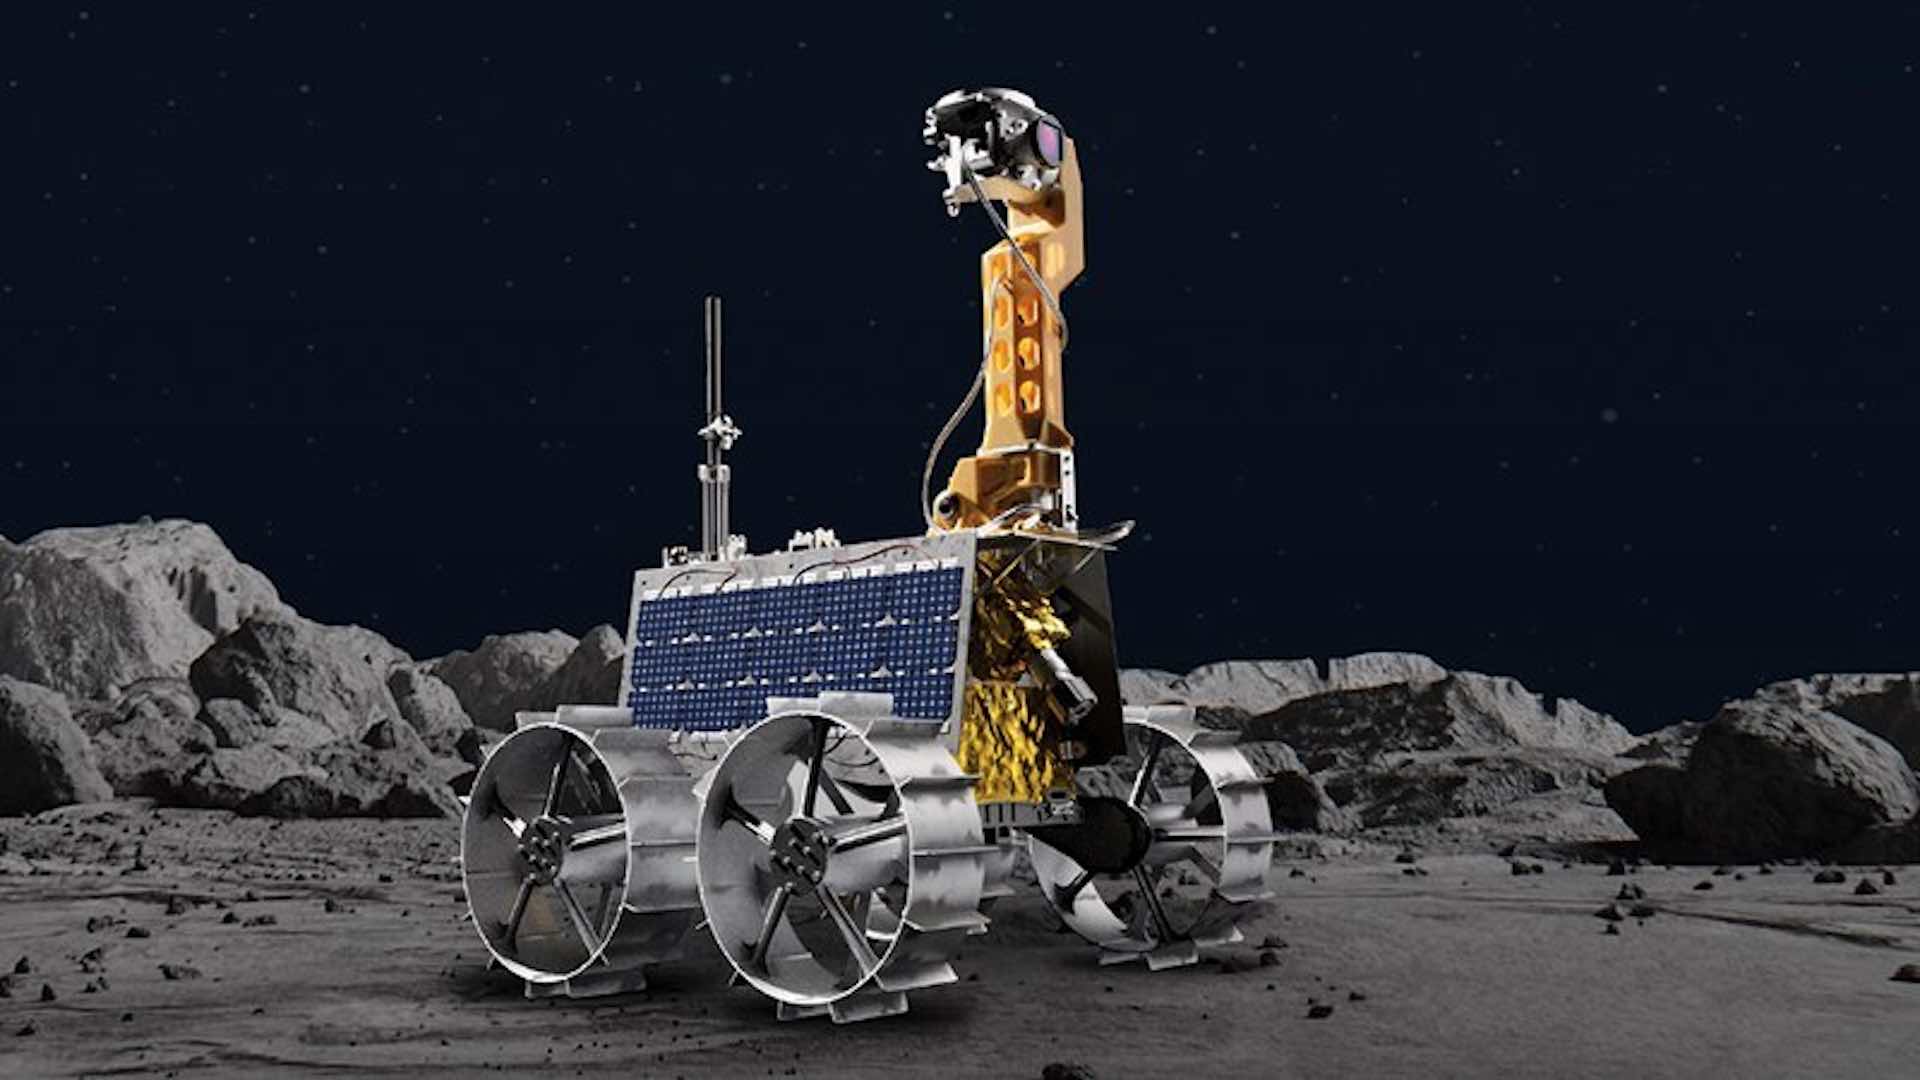 Rashid Rover to explore Atlas Crater on the Moon on April 25th